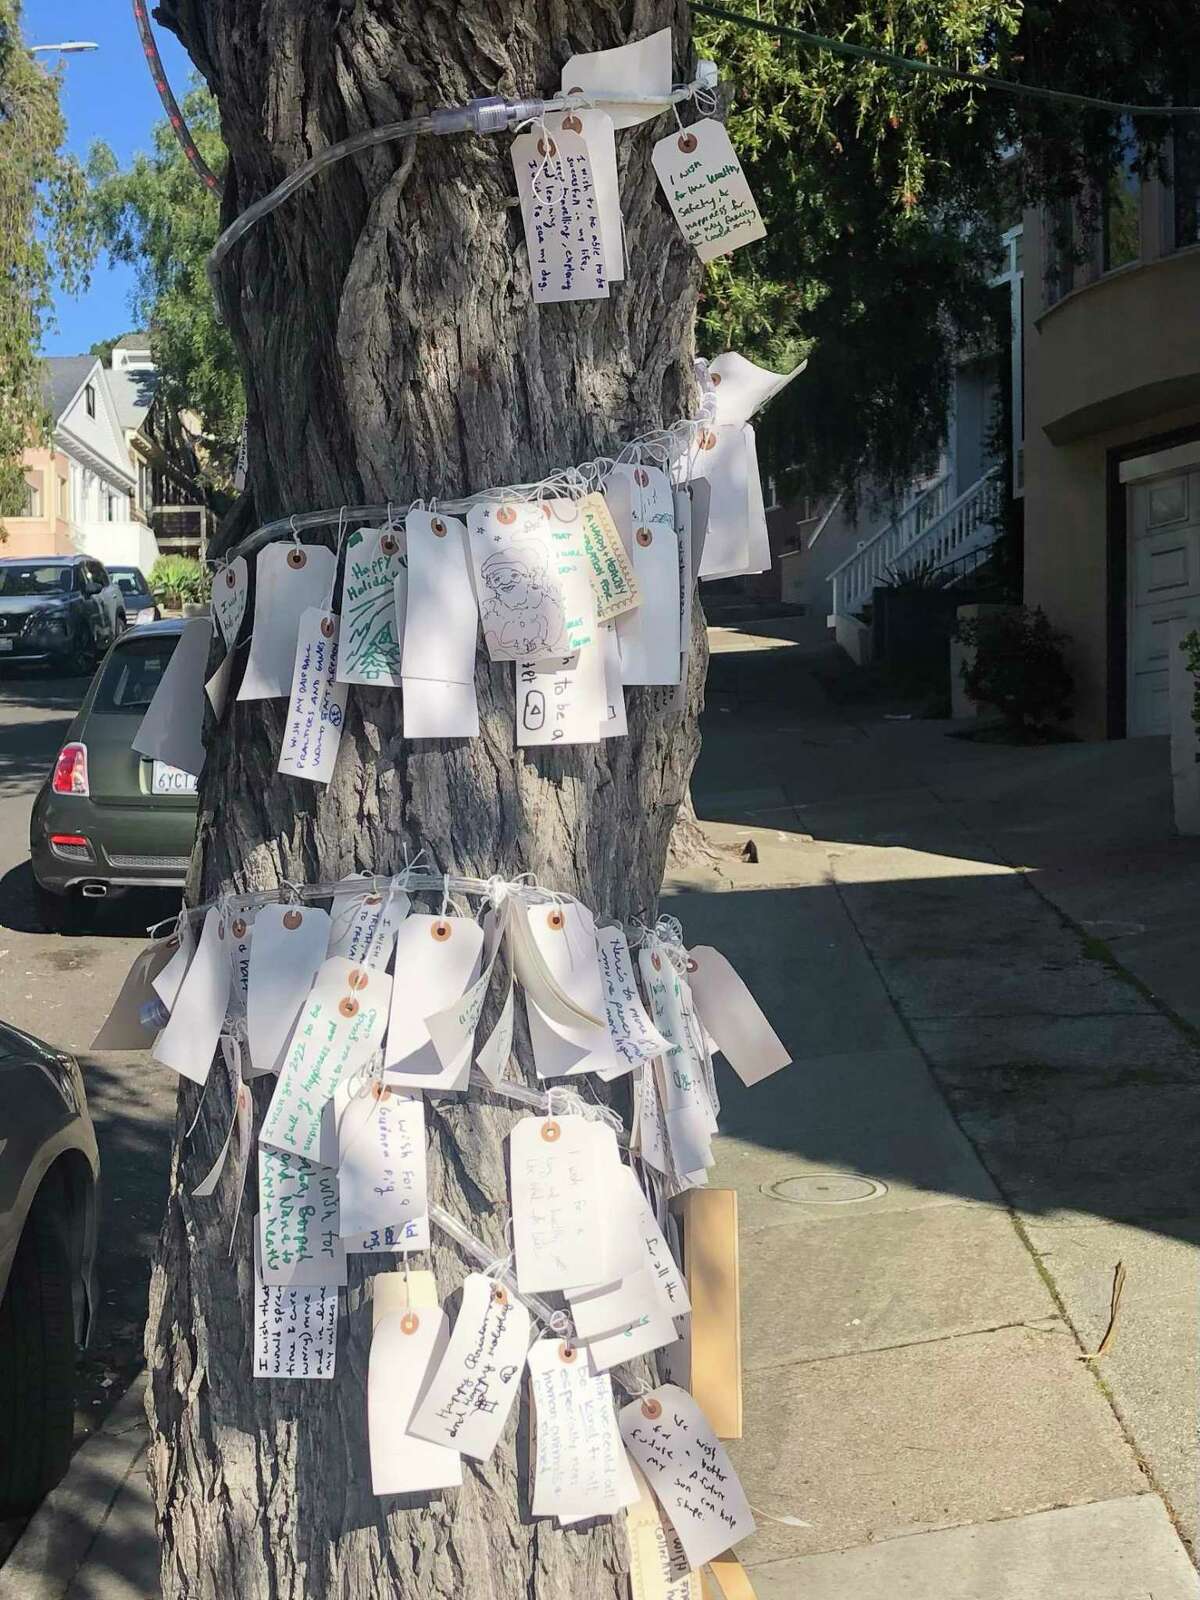 The wishing tree on Eugenia Street in Bernal Heights is festooned with notes.